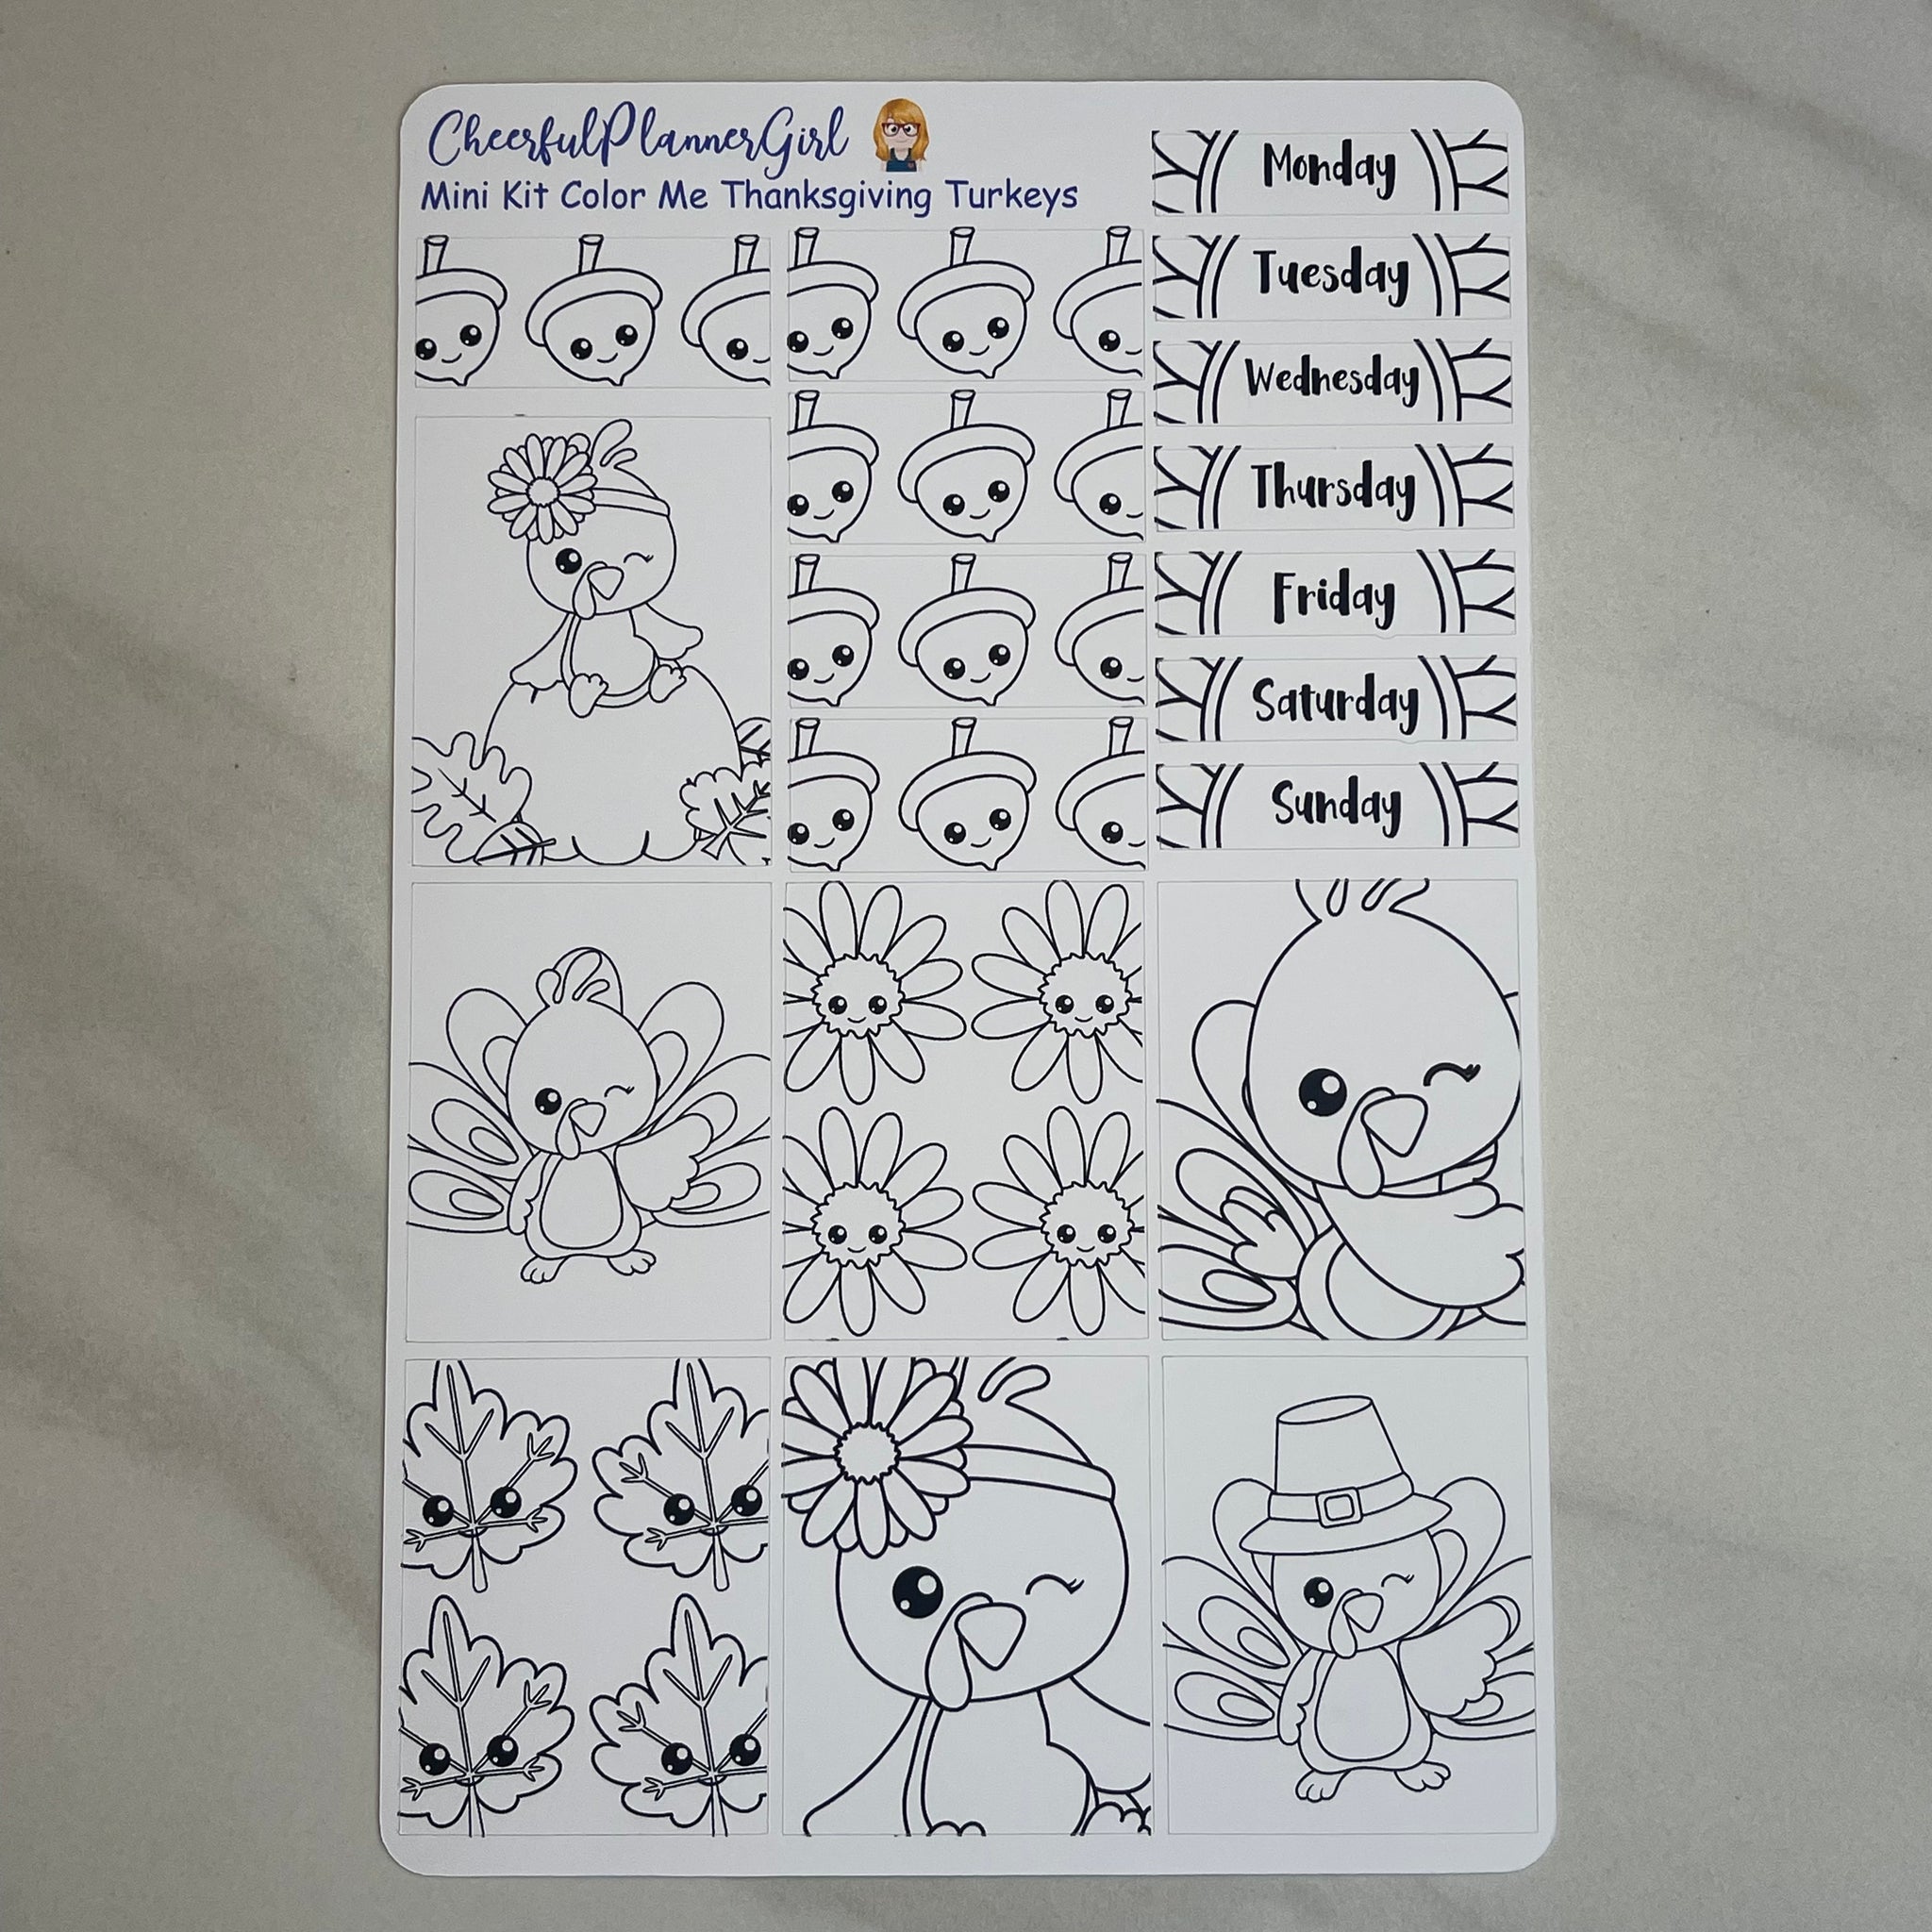 Color Me Thanksgiving Turkeys Mini Kit Weekly Layout Planner Stickers